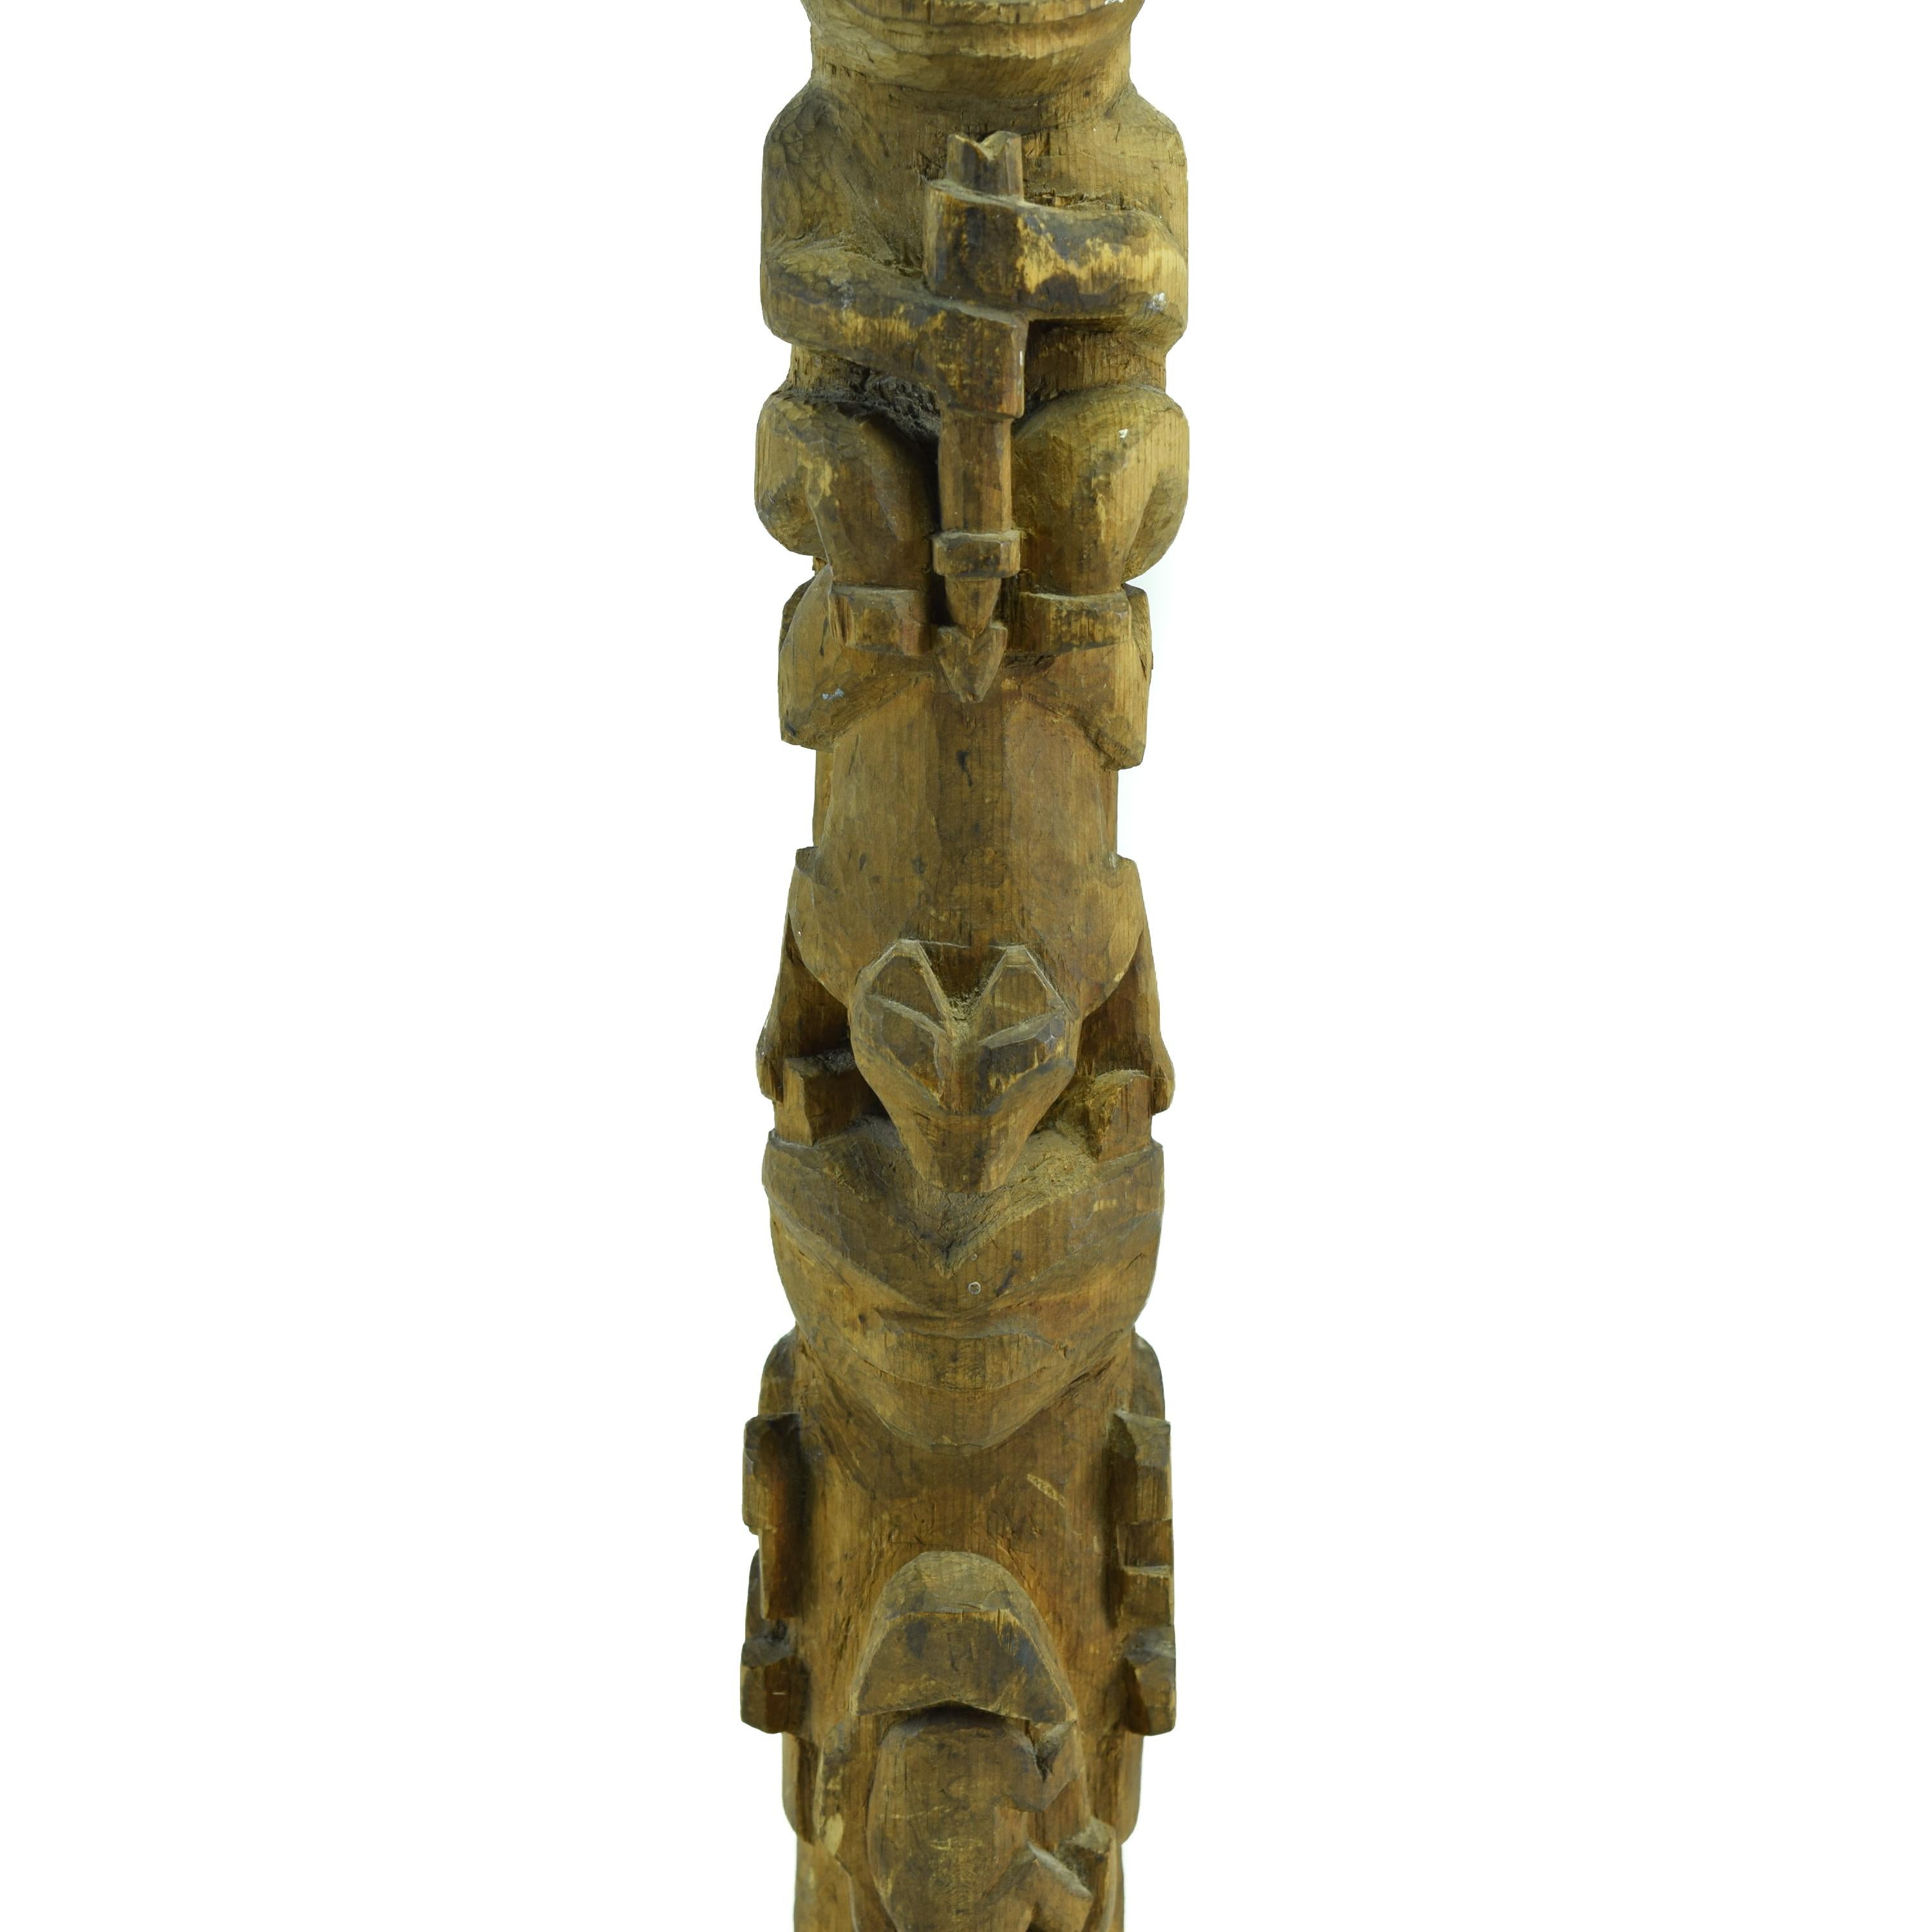 19th Century Multi-Figure Tlingit Totem In Good Condition For Sale In Coeur d'Alene, ID